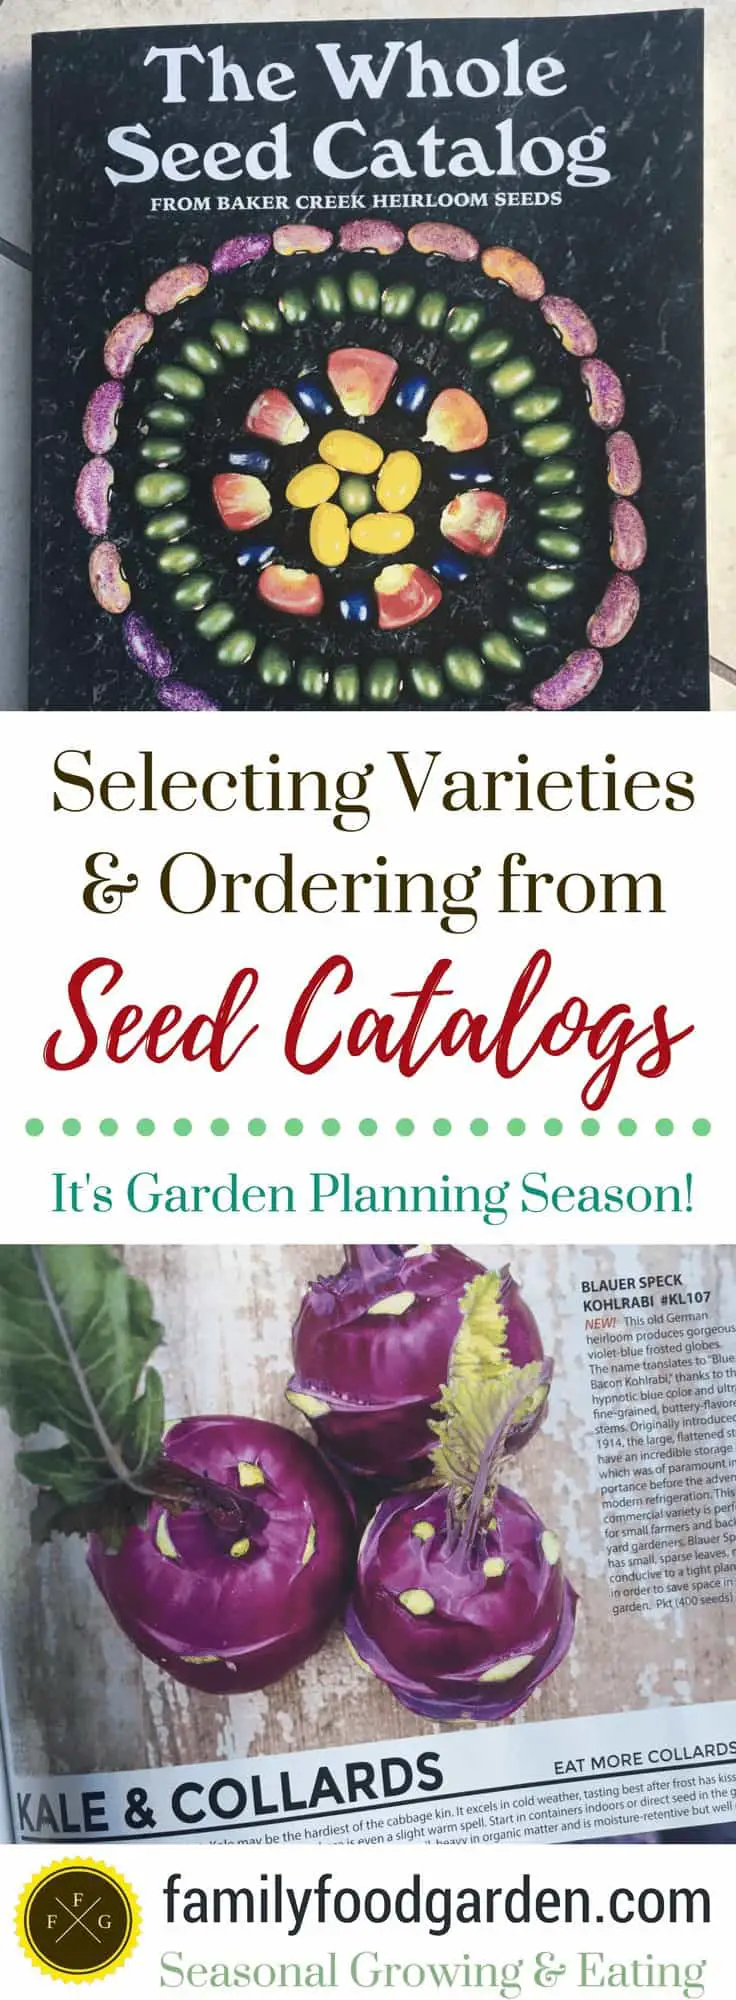 Garden planning tips for seed catalogs